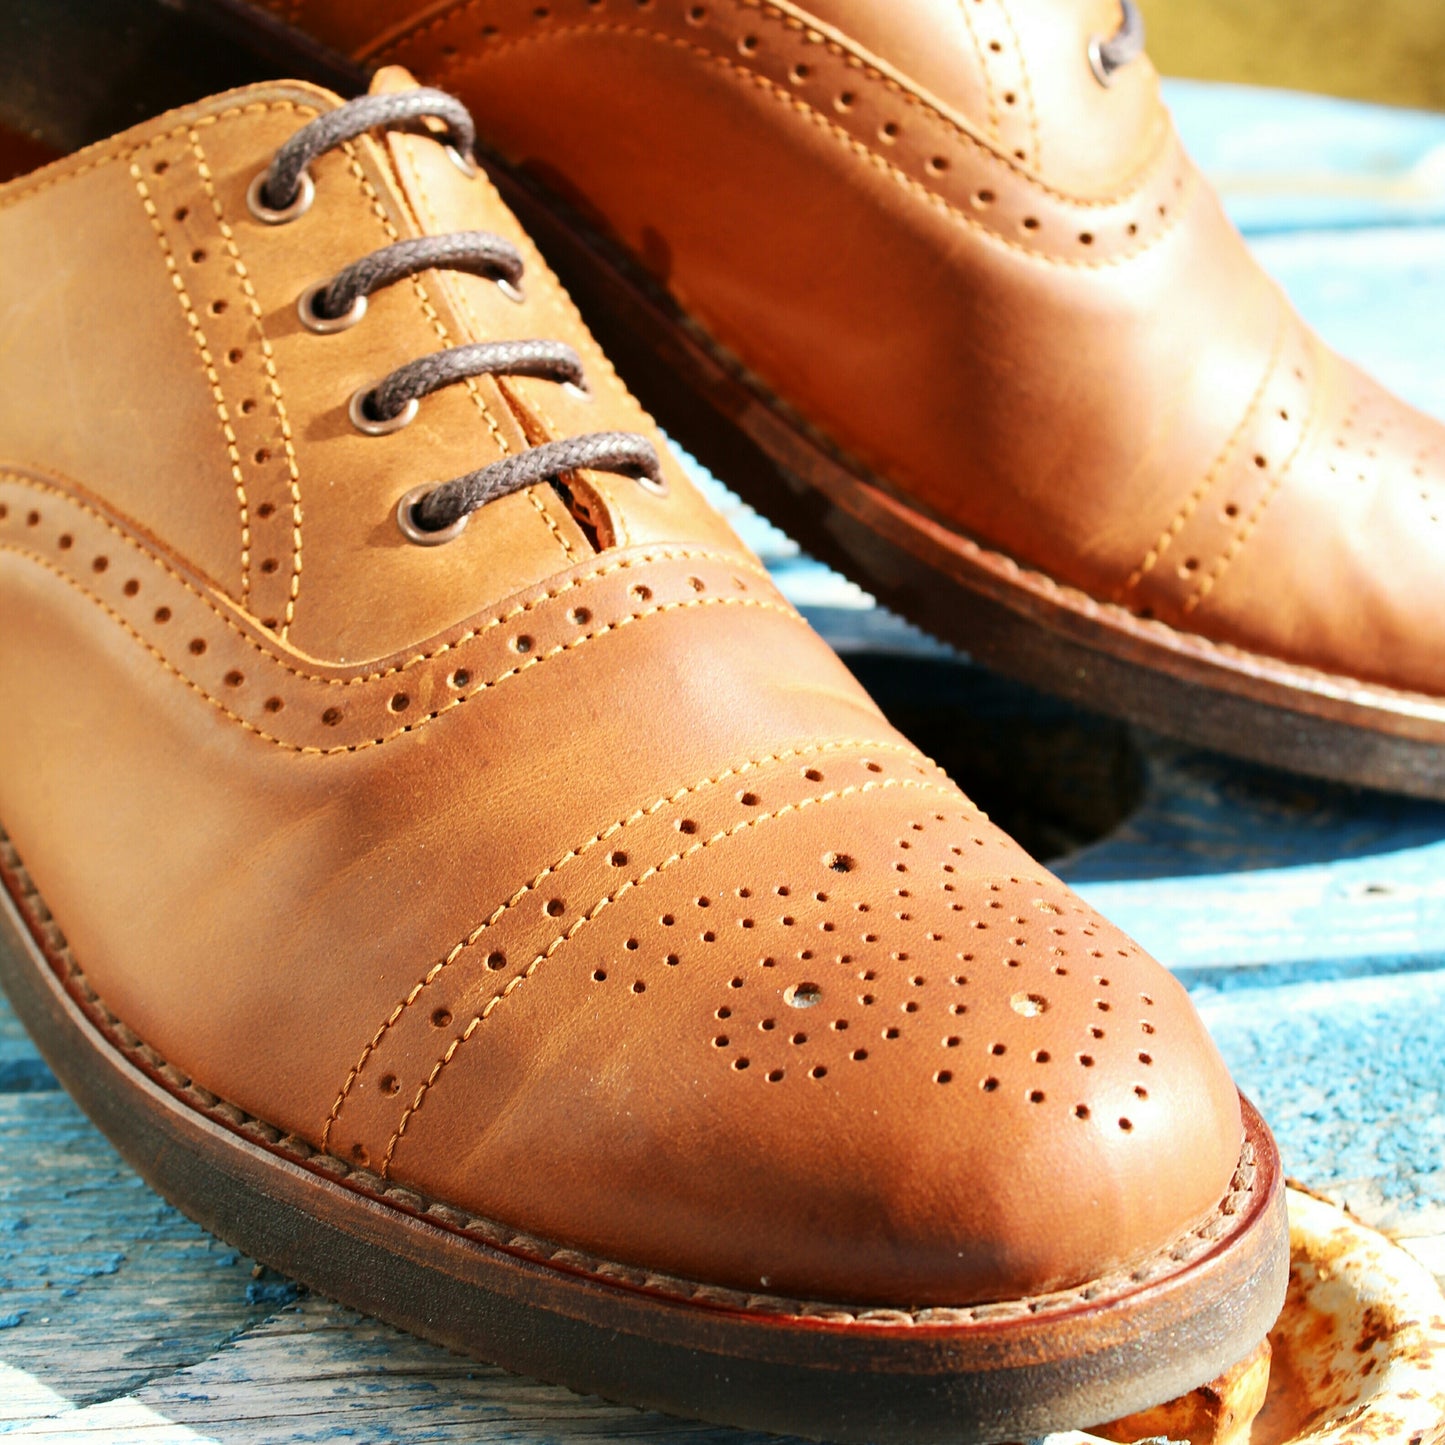 Minho Shoes - OldMulla - Boots Store, Handmade By George